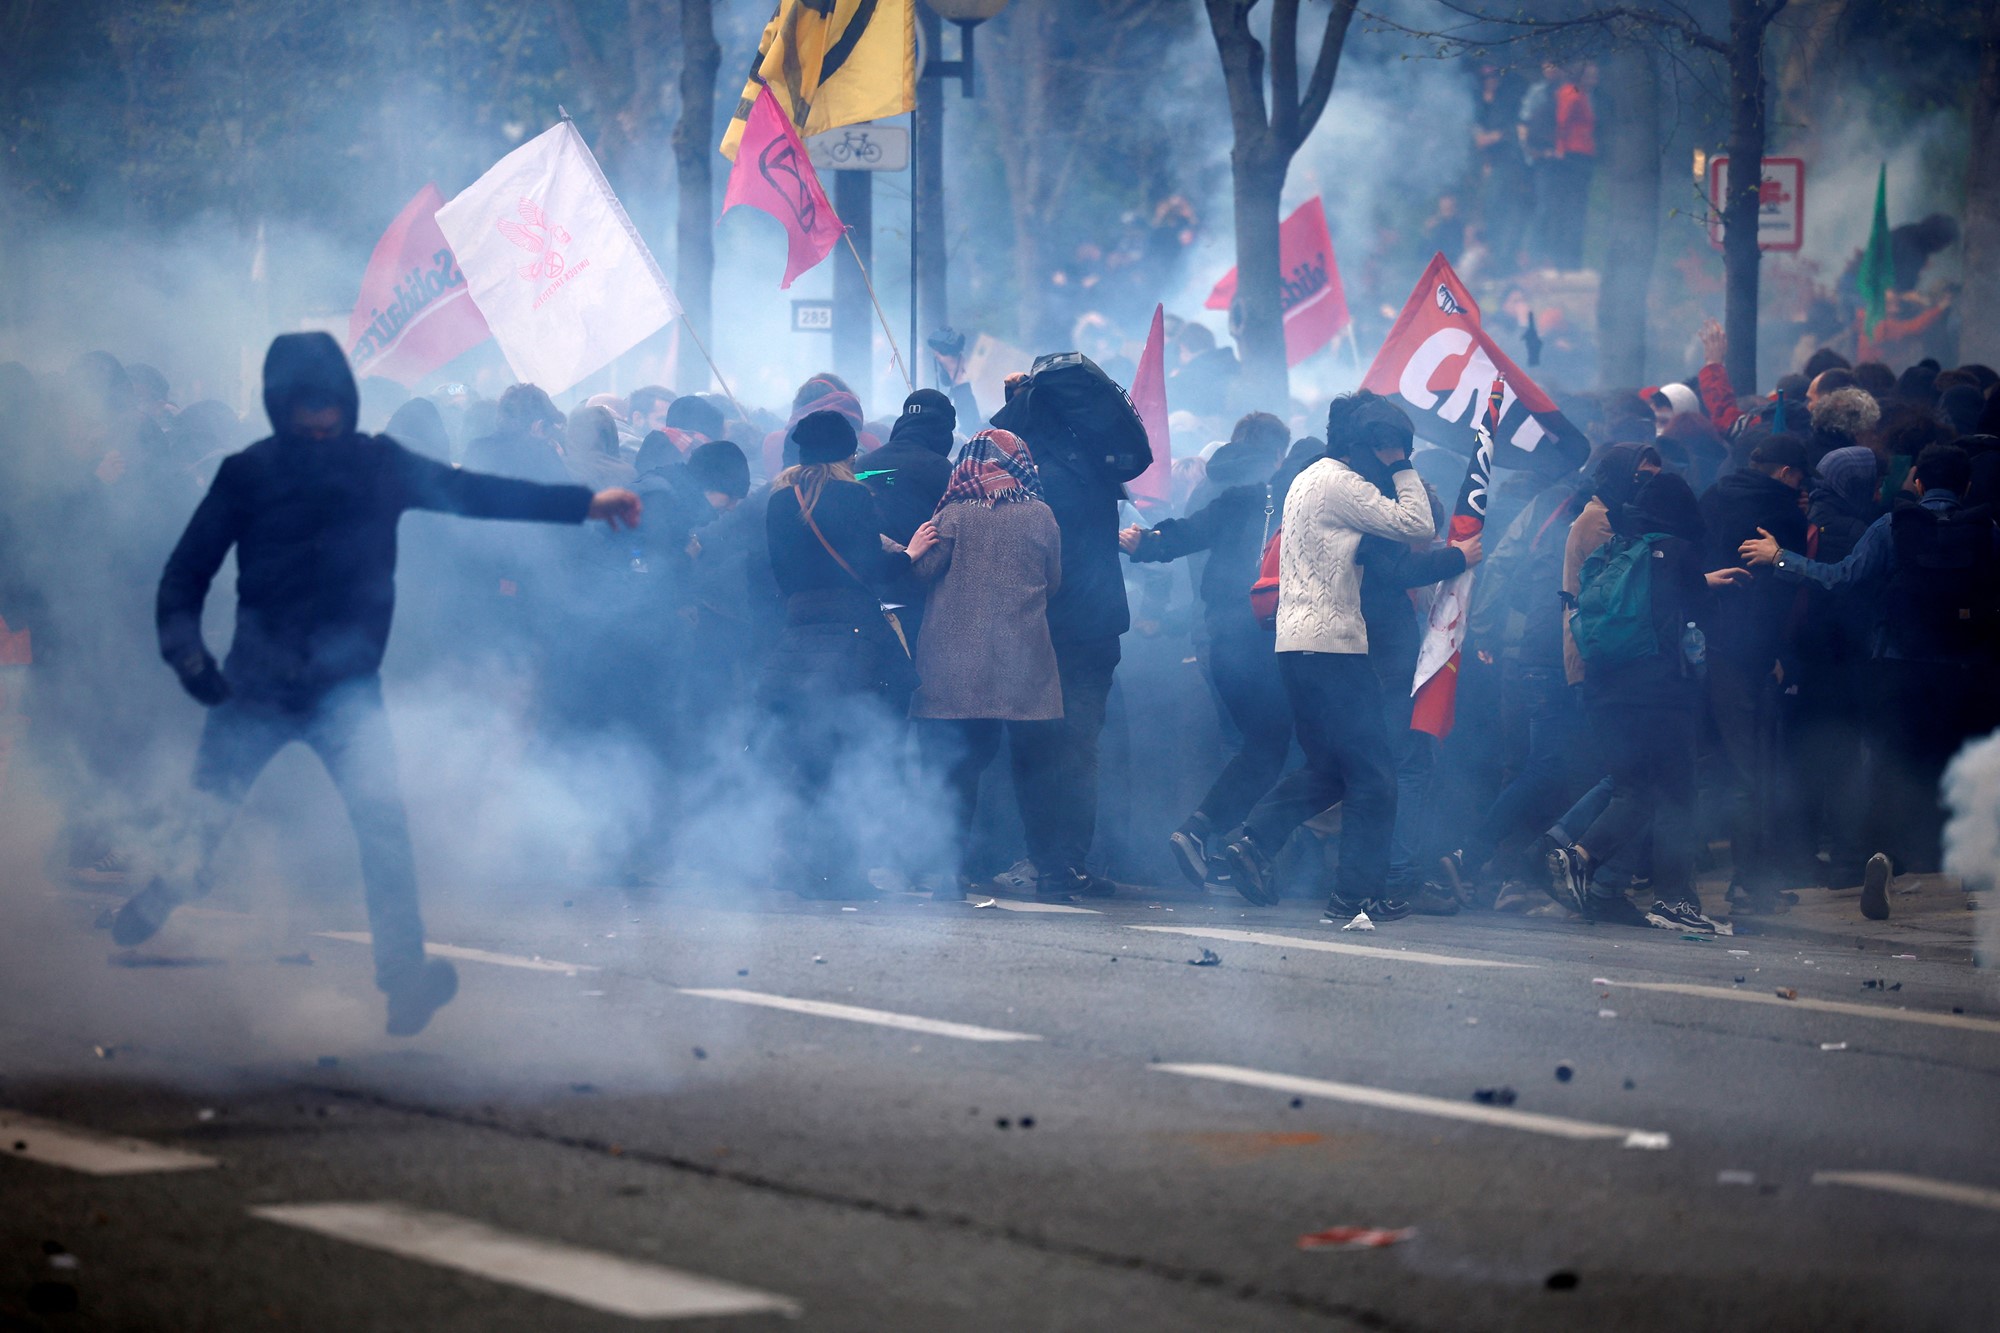 Protest crowds run front smoke on a street.